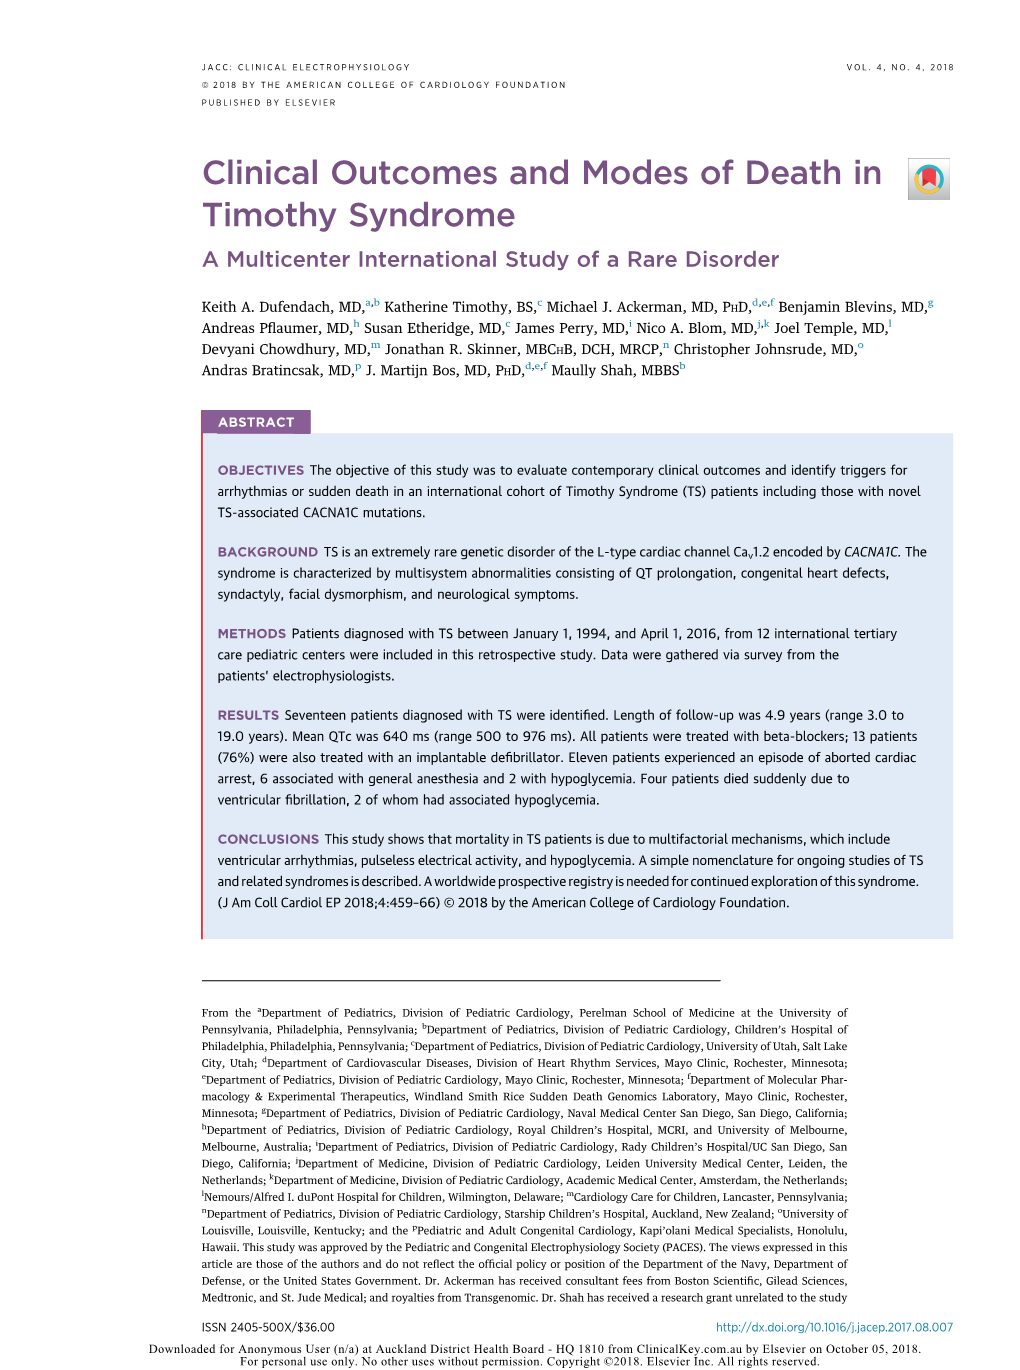 Clinical Outcomes and Modes of Death in Timothy Syndrome a Multicenter International Study of a Rare Disorder